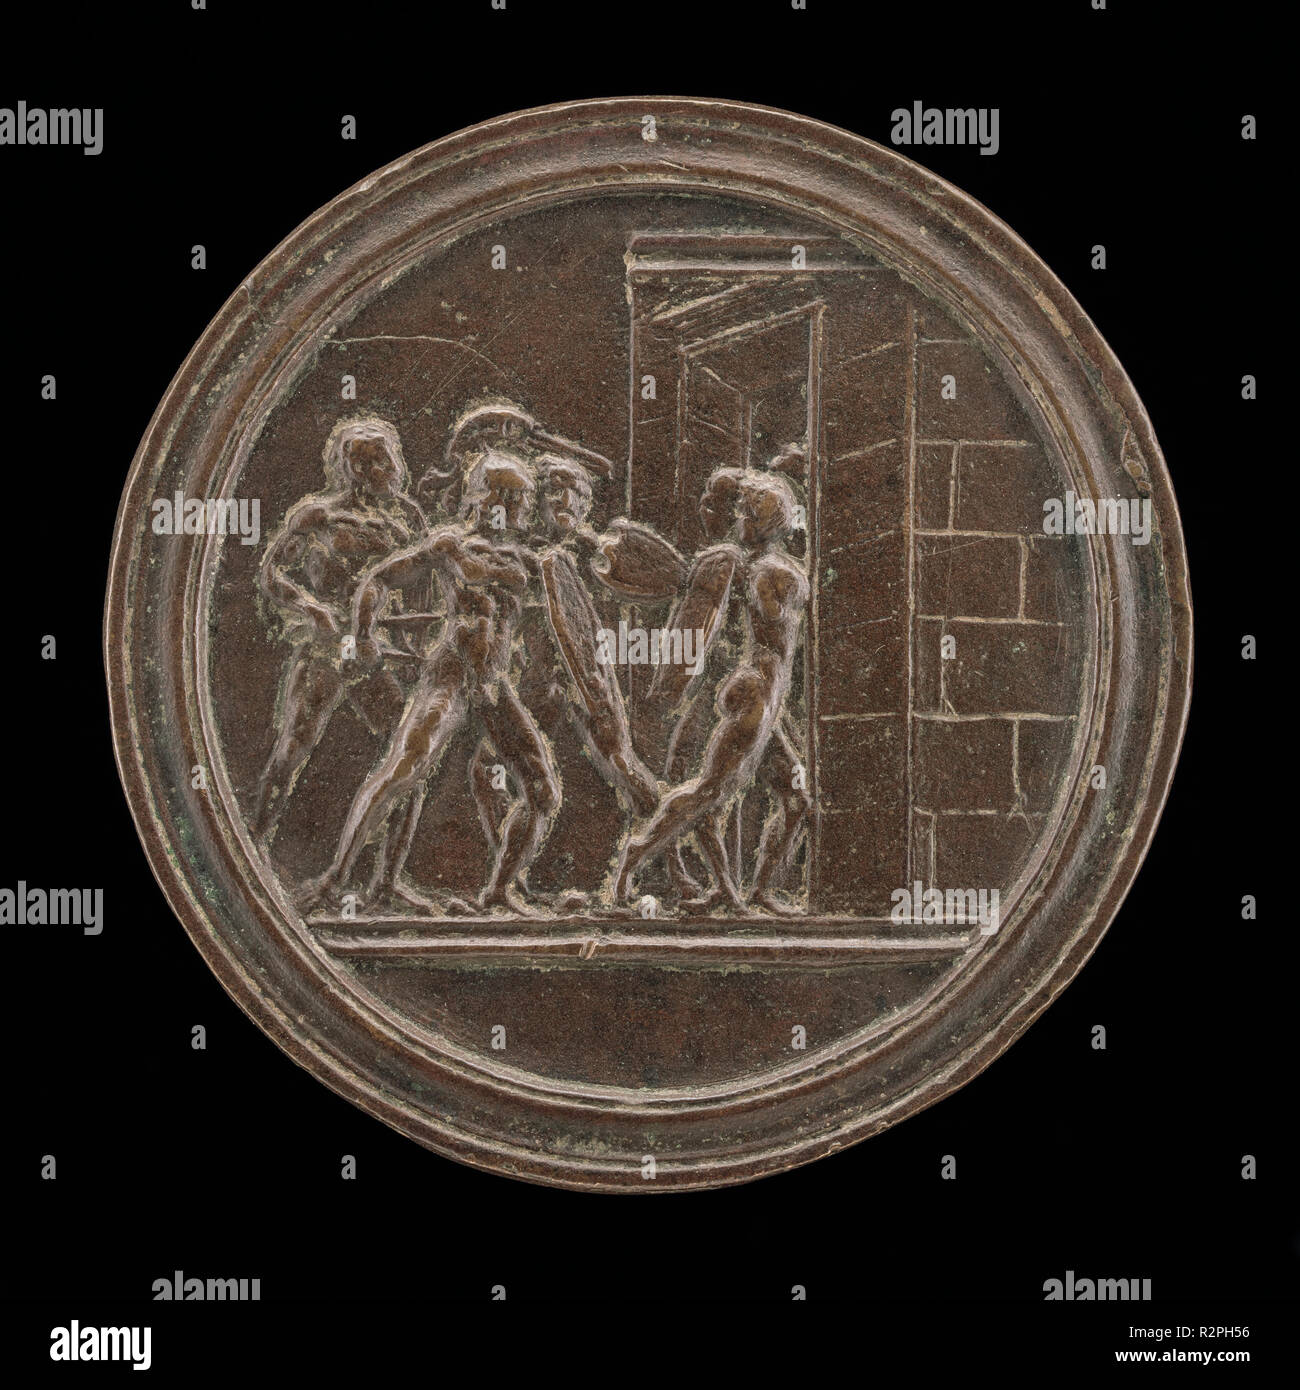 Soldiers Attacking a Gate. Dimensions: overall (diameter): 6.3 cm (2 1/2 in.) gross weight: 51 gr. Medium: bronze//Dark brown patina. Museum: National Gallery of Art, Washington DC. Author: Master of Coriolanus. Stock Photo